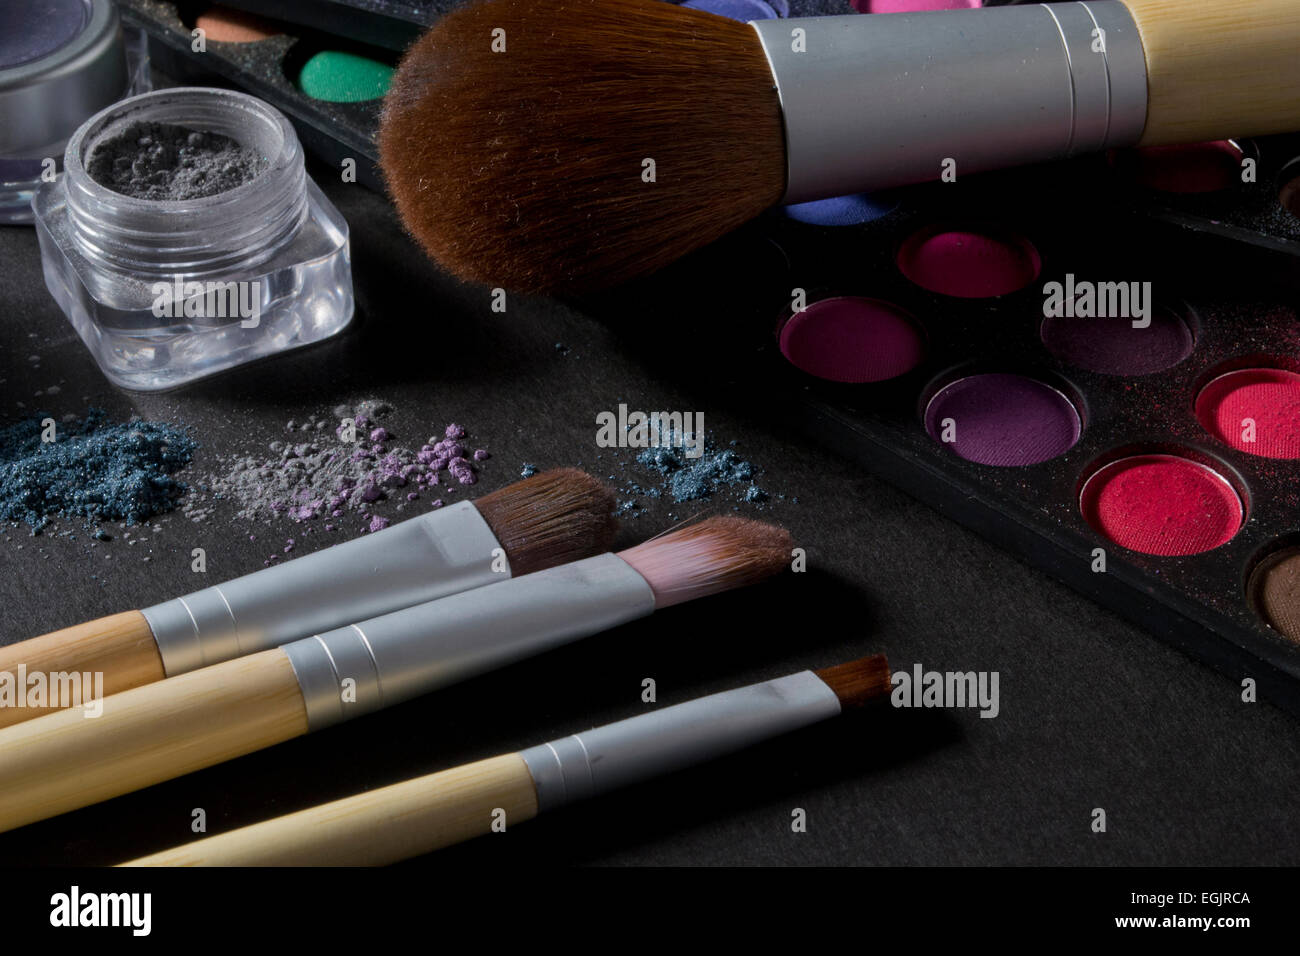 Various makeup products on a black background Stock Photo